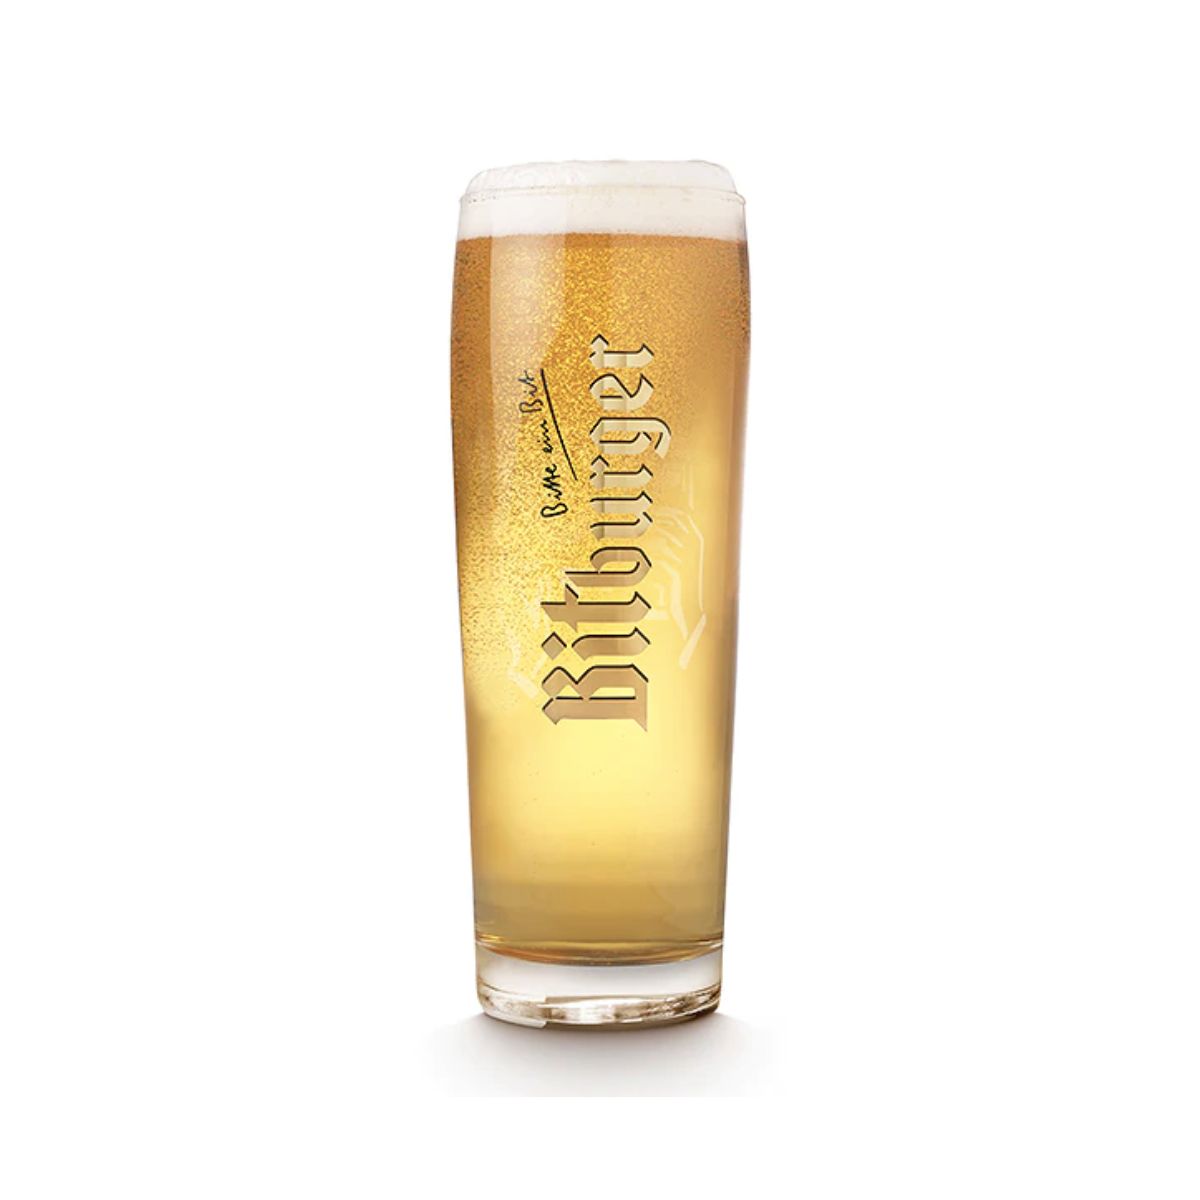 A glass of alcohol free lager - bitburger